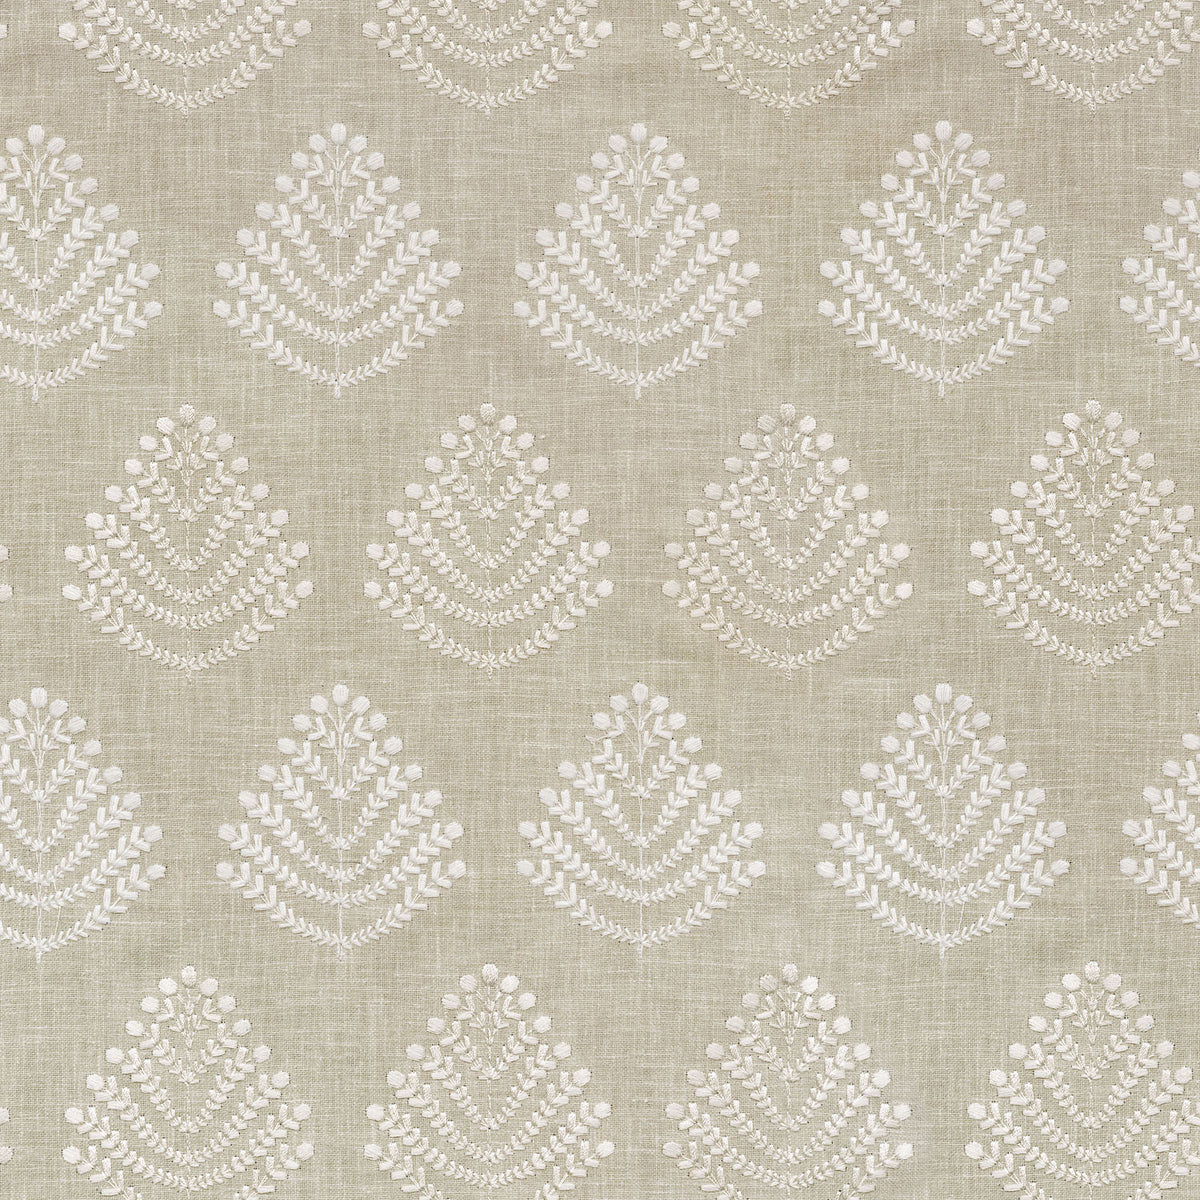 P/K Lifestyles Royal Fern Embroidery - Papyrus 408843 Upholstery Fabric